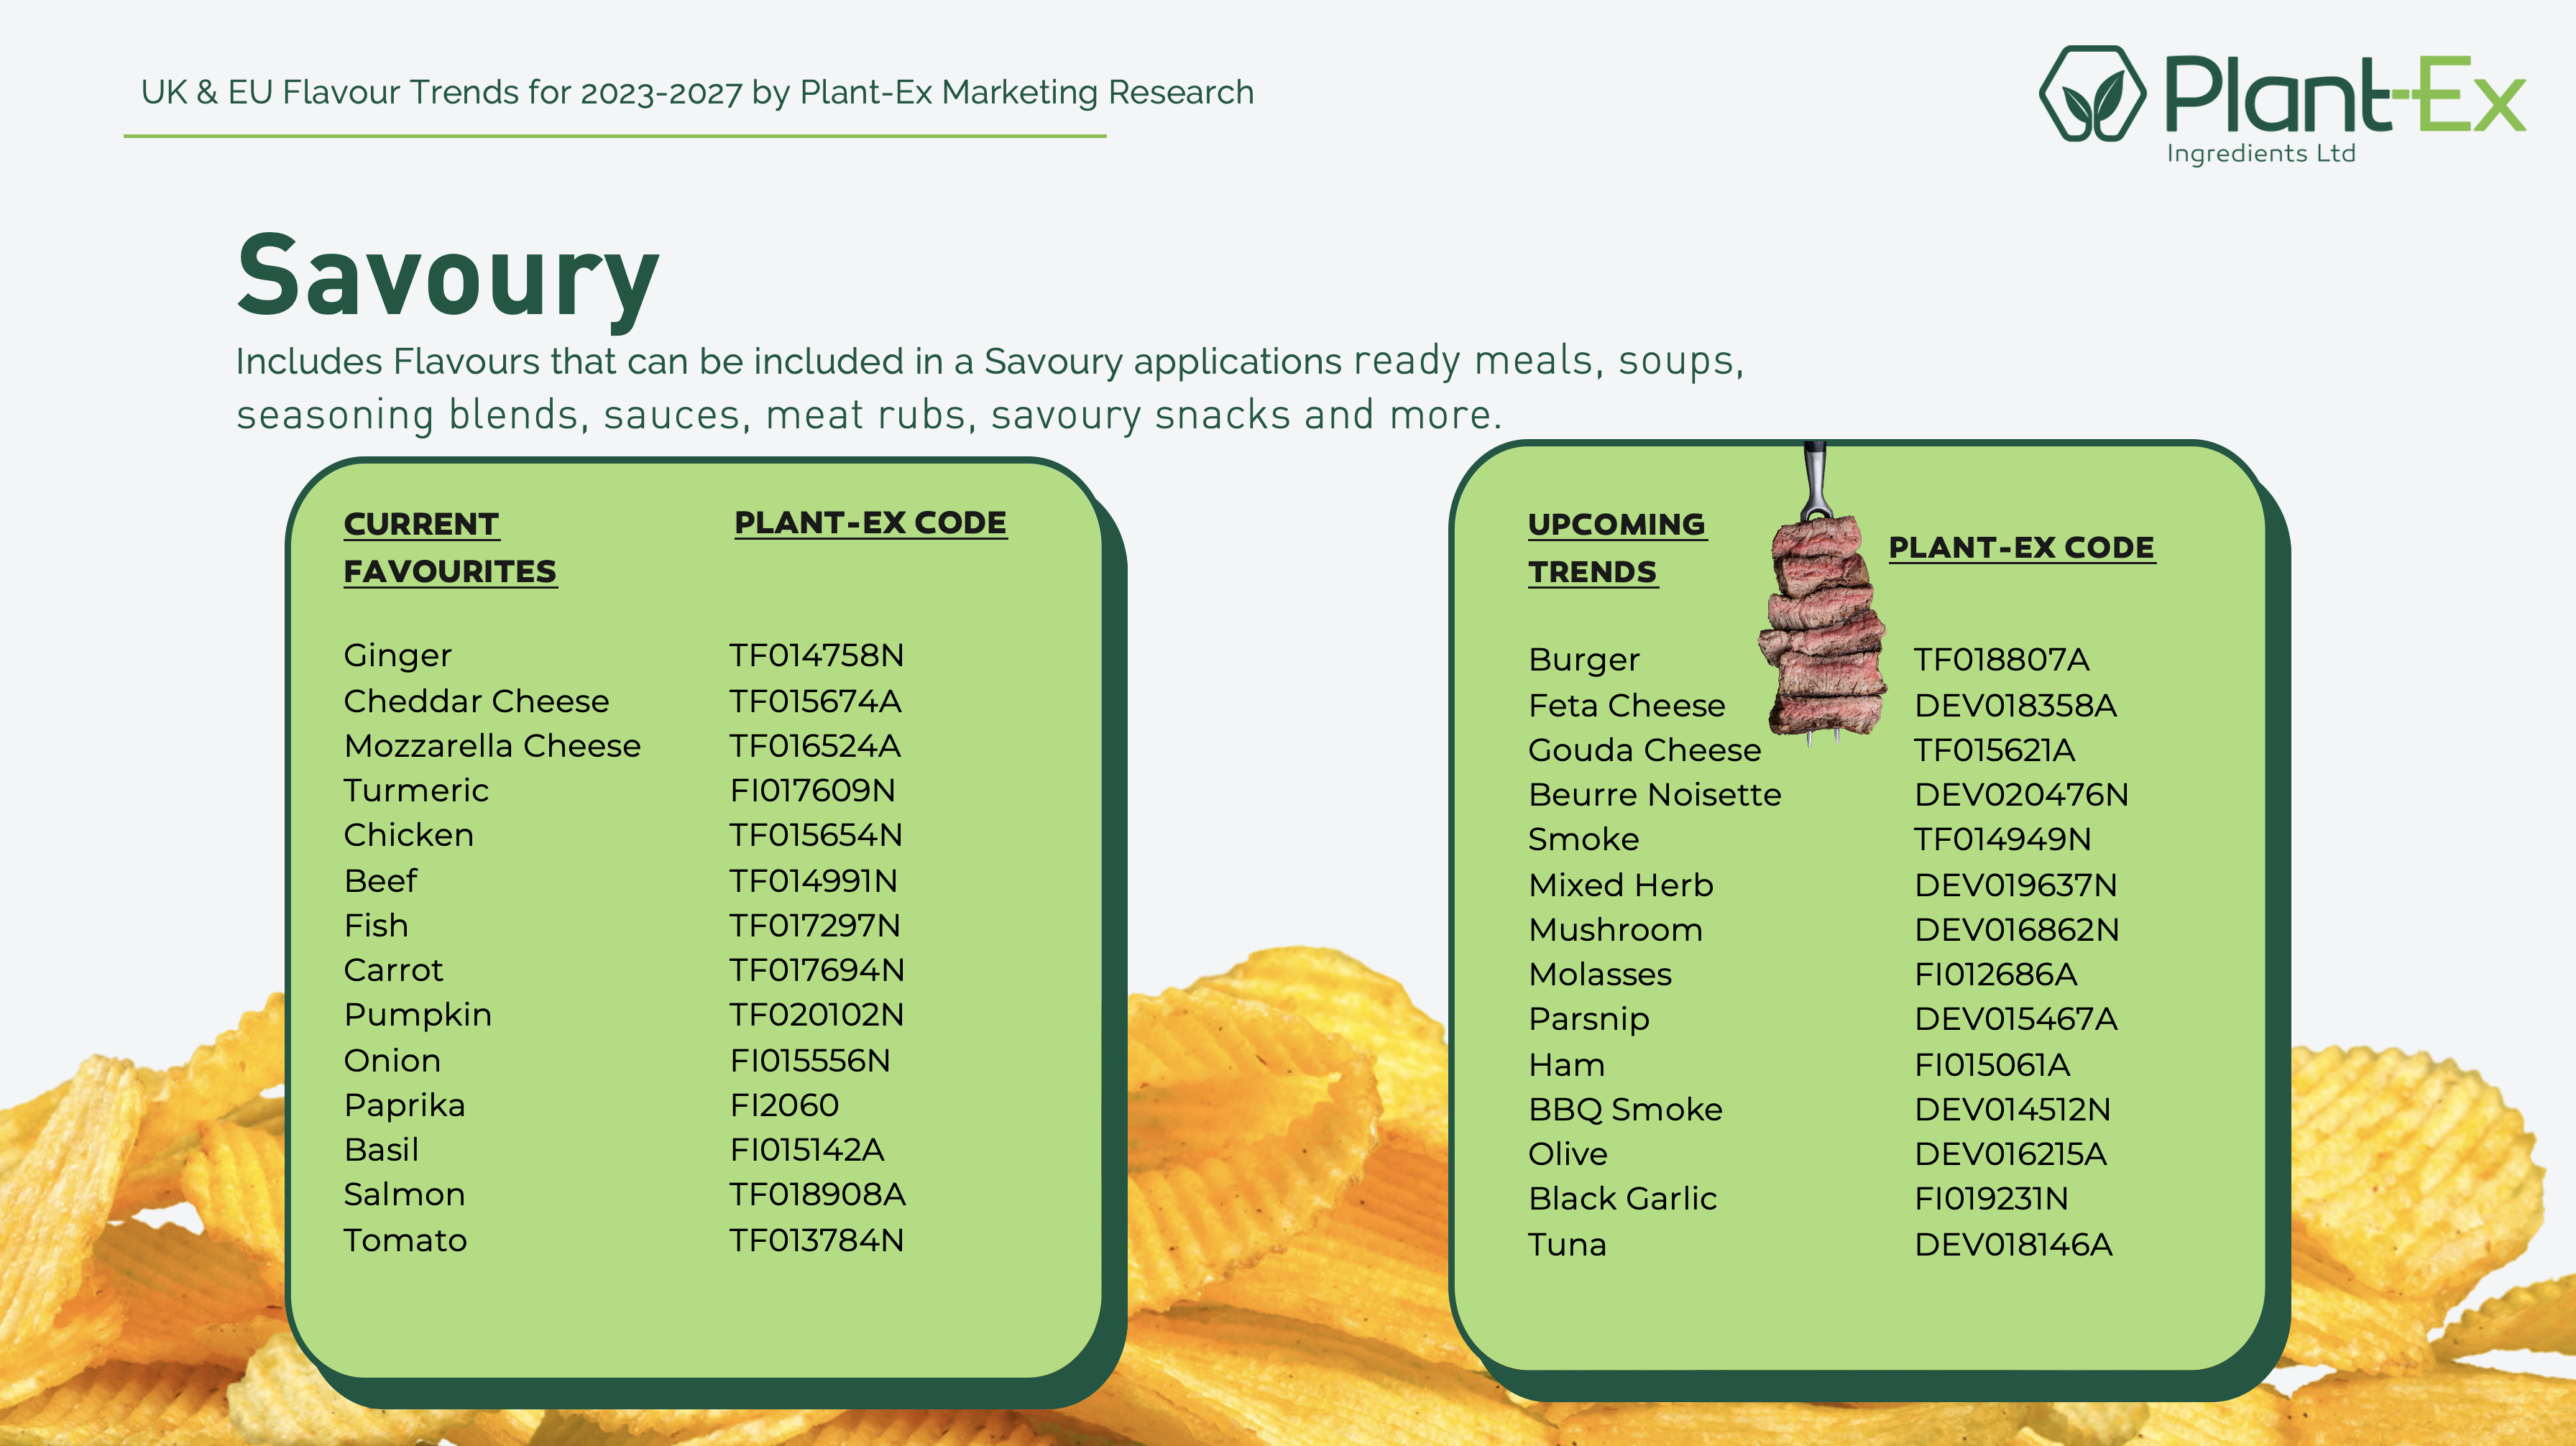 savoury flavour trends UK and EU